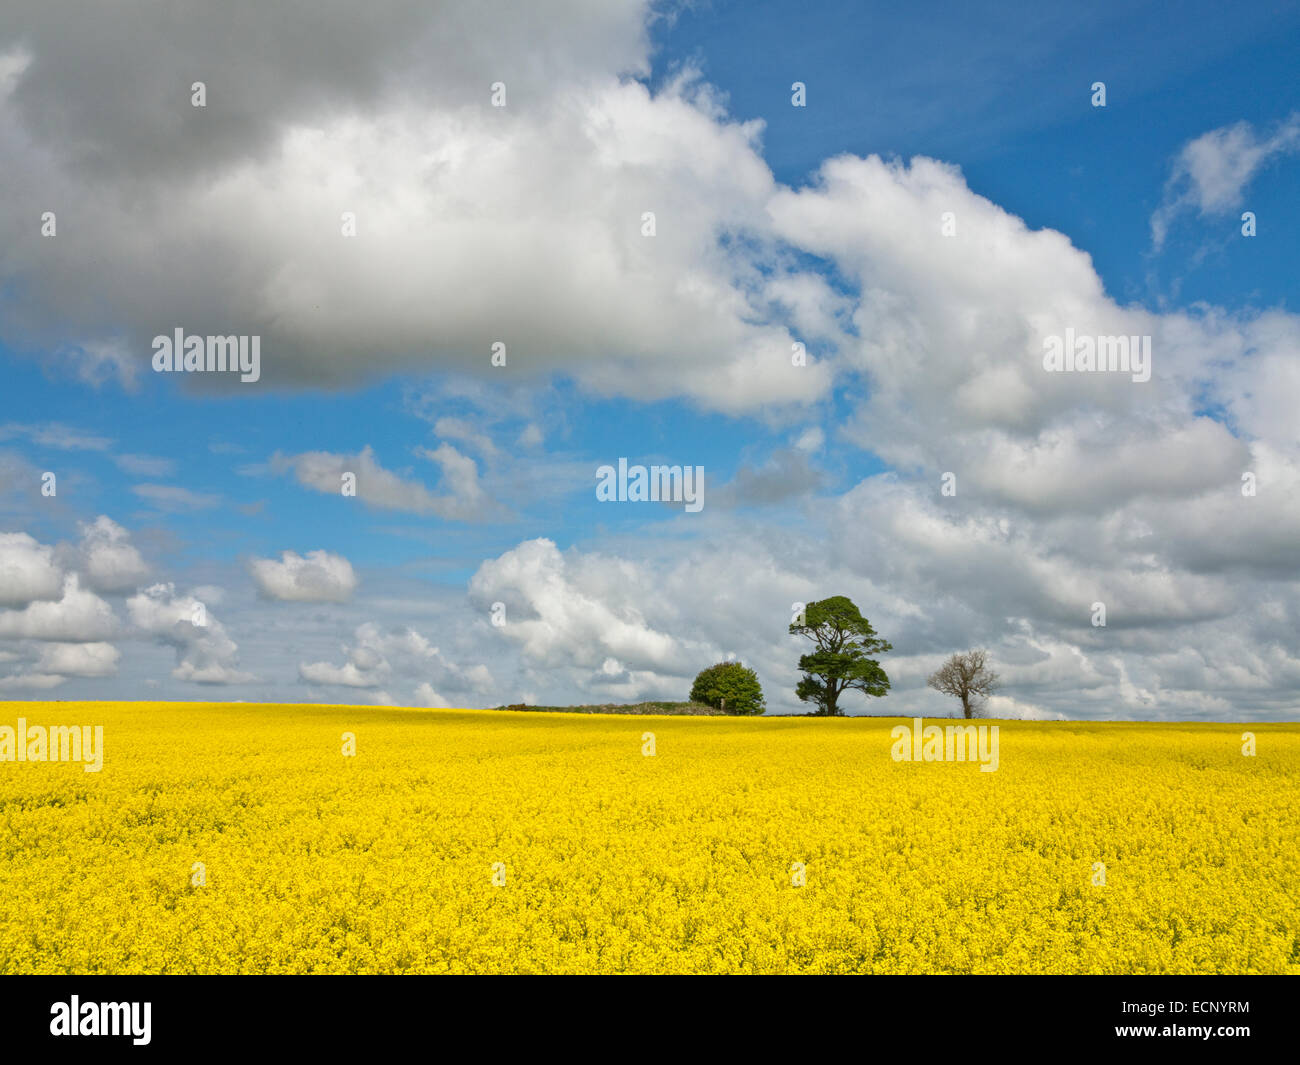 Canola or rapeseed field of bright yellow flowers, pines in background, north of Aberdeen, in Aberdeenshire, Scotland Stock Photo